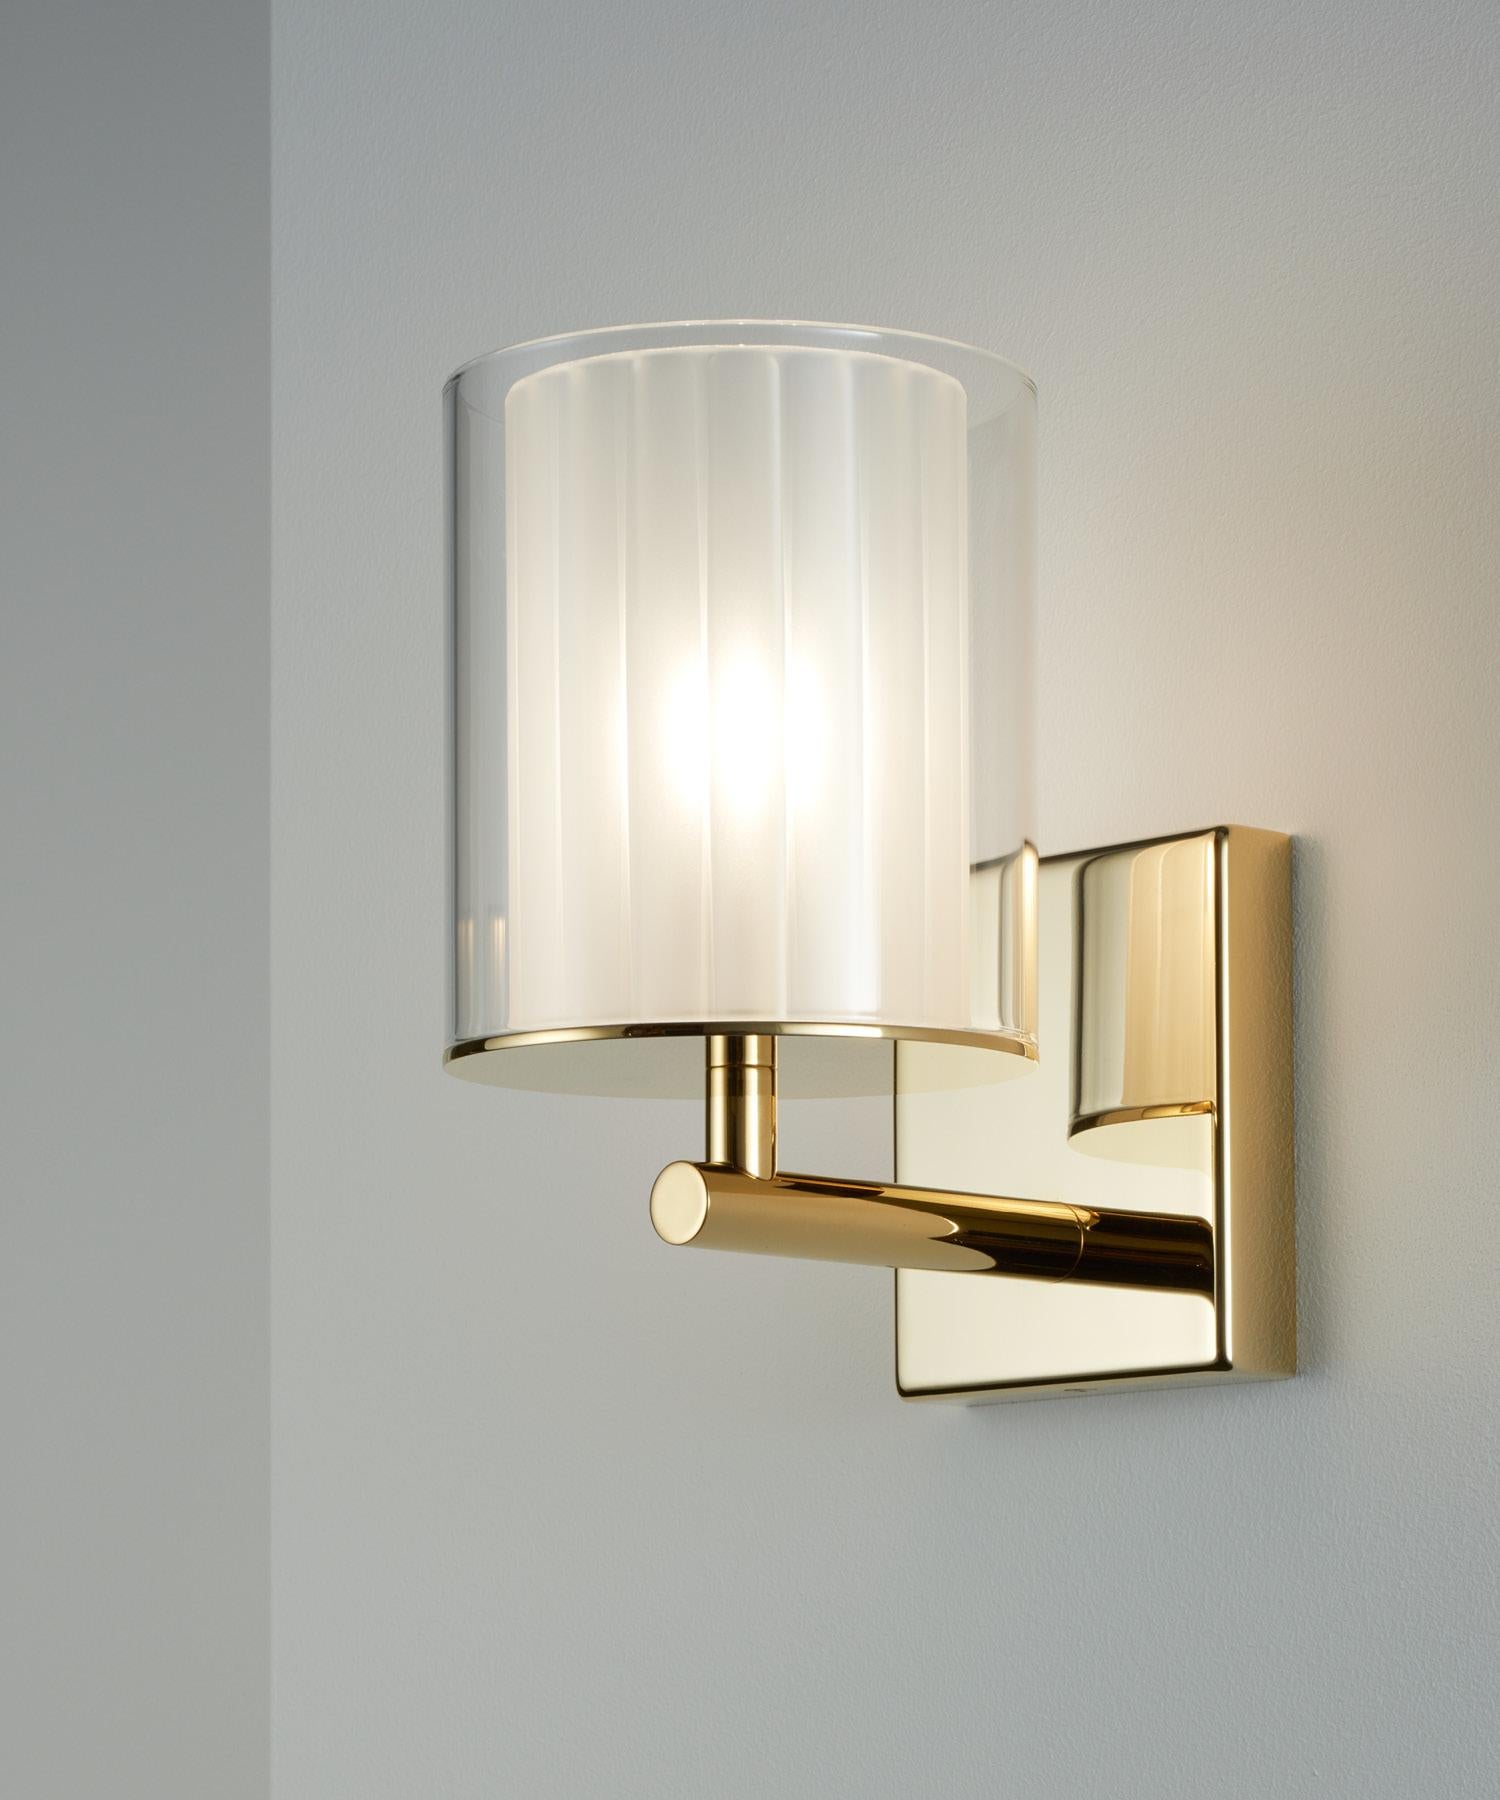 The Flute Wall Light XL is the latest addition to the Flute Wall family. Designed specifically for the US market, this enlarged version has a grander, more substantial feel to the standard Flute Wall Light. Available in polished chrome, nickel or